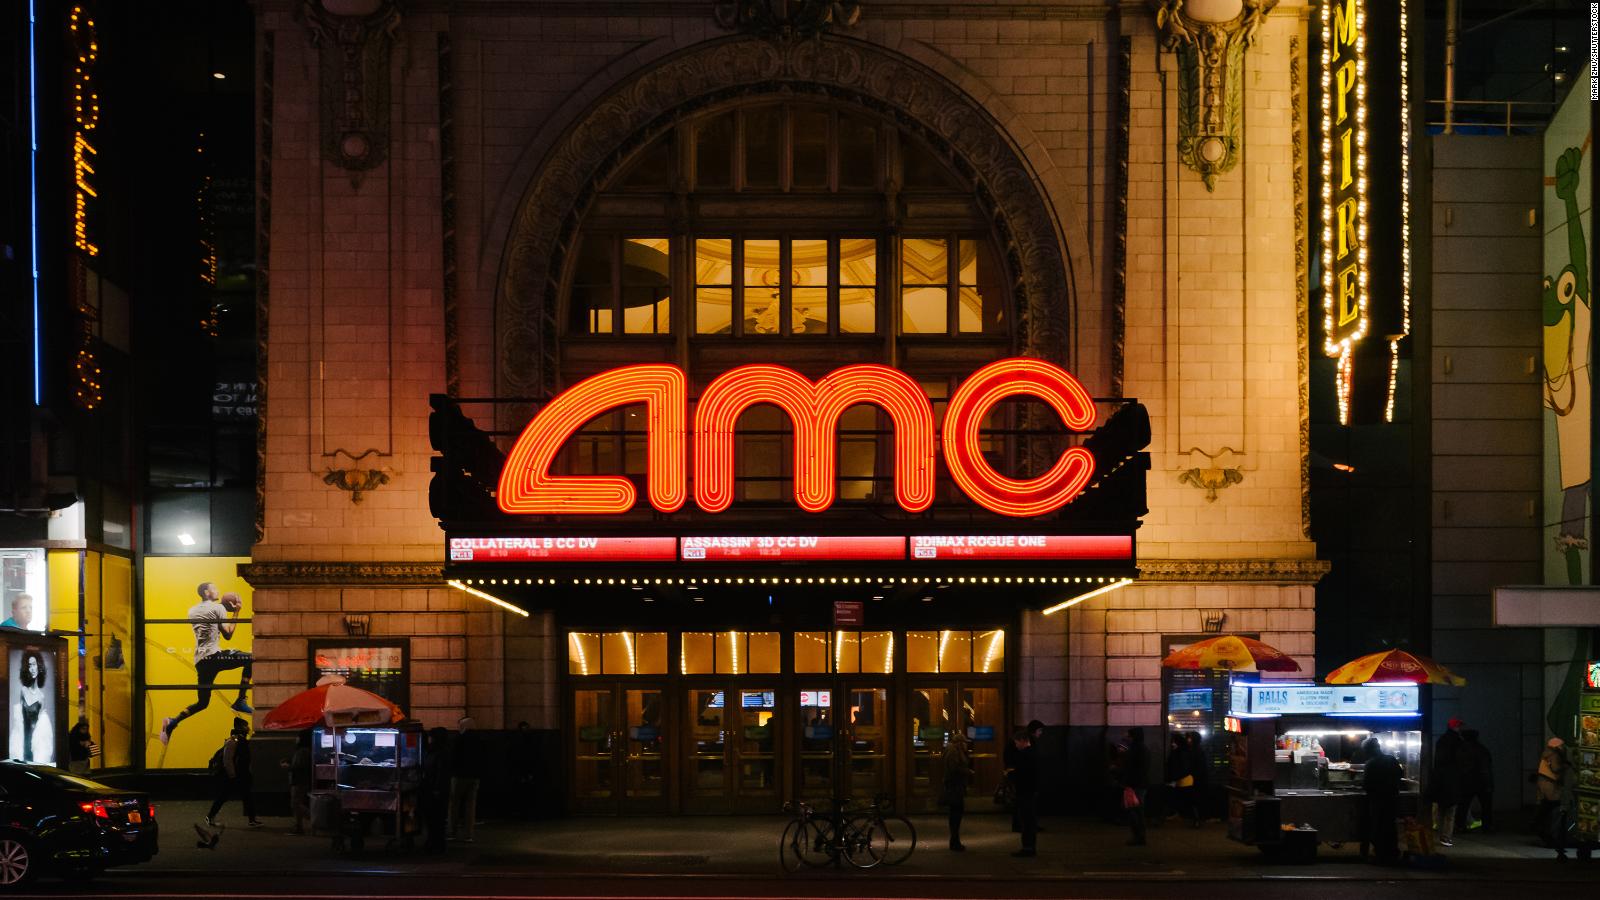 All that You Need to Know About the AMC Black Ticket MSB